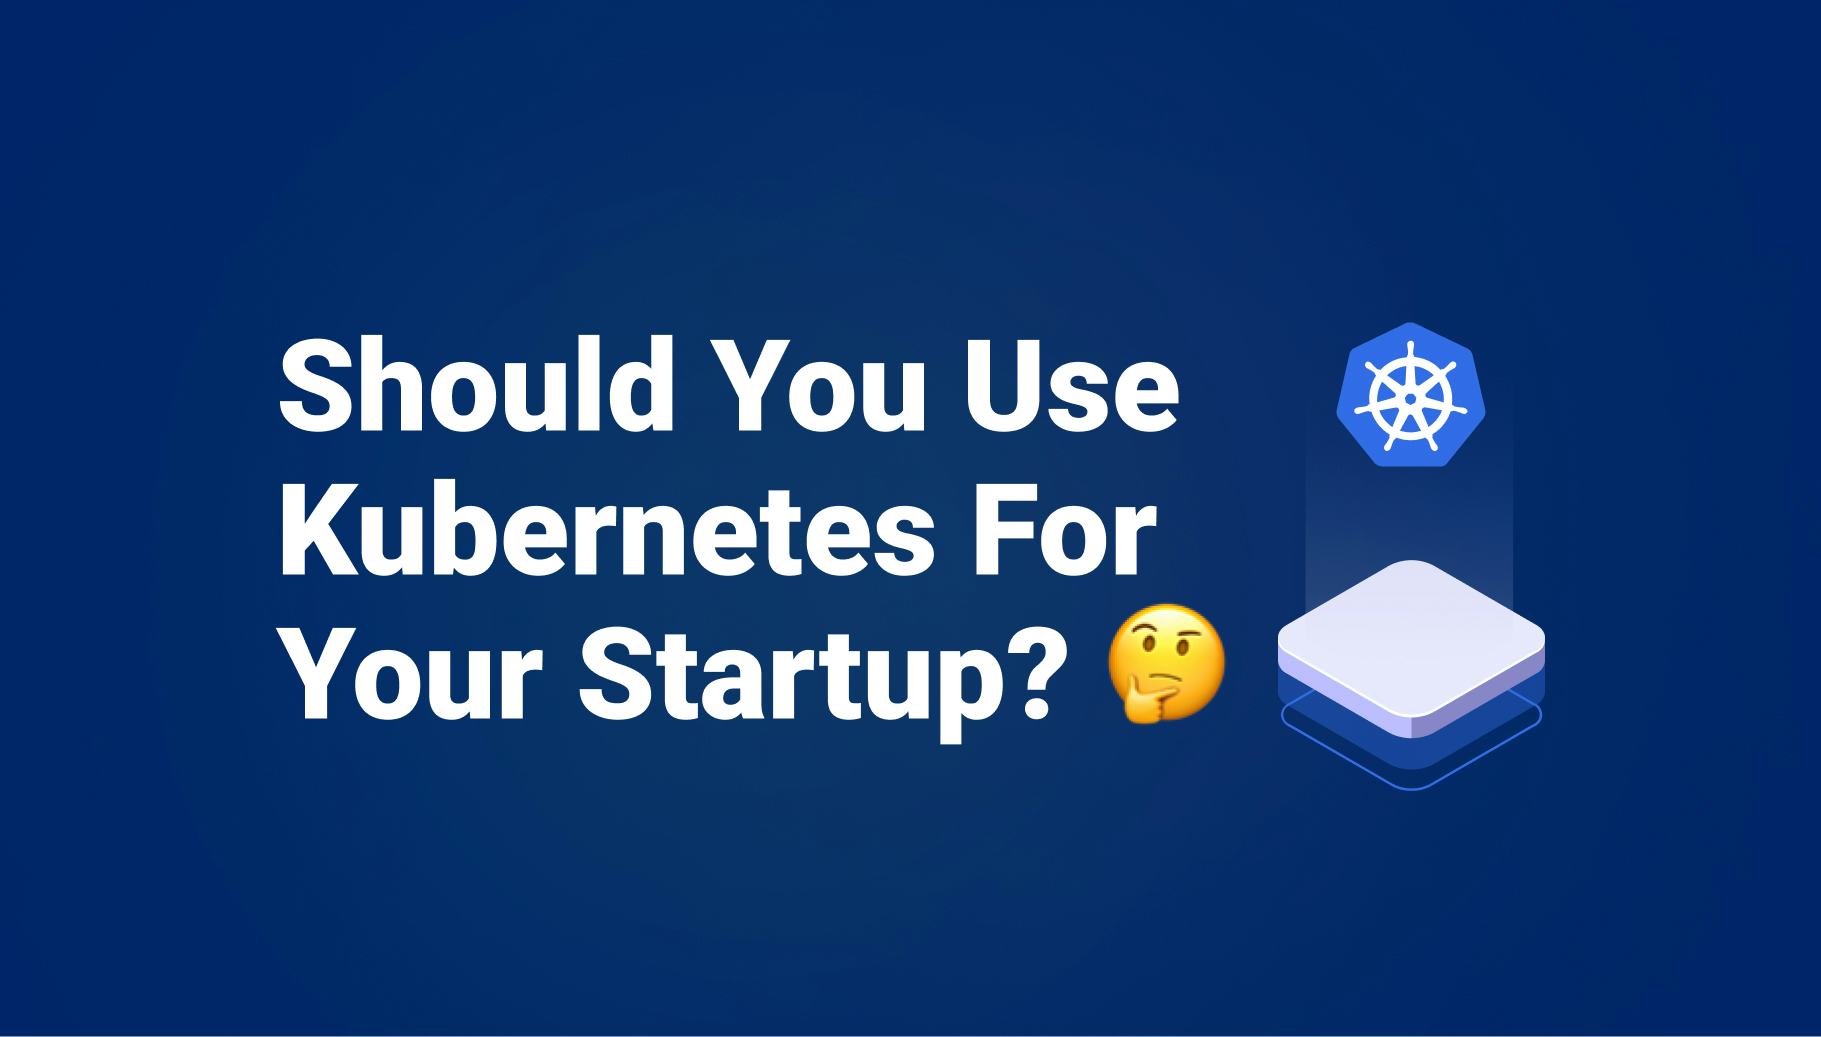 Should you use Kubernetes for your Startup? - Qovery